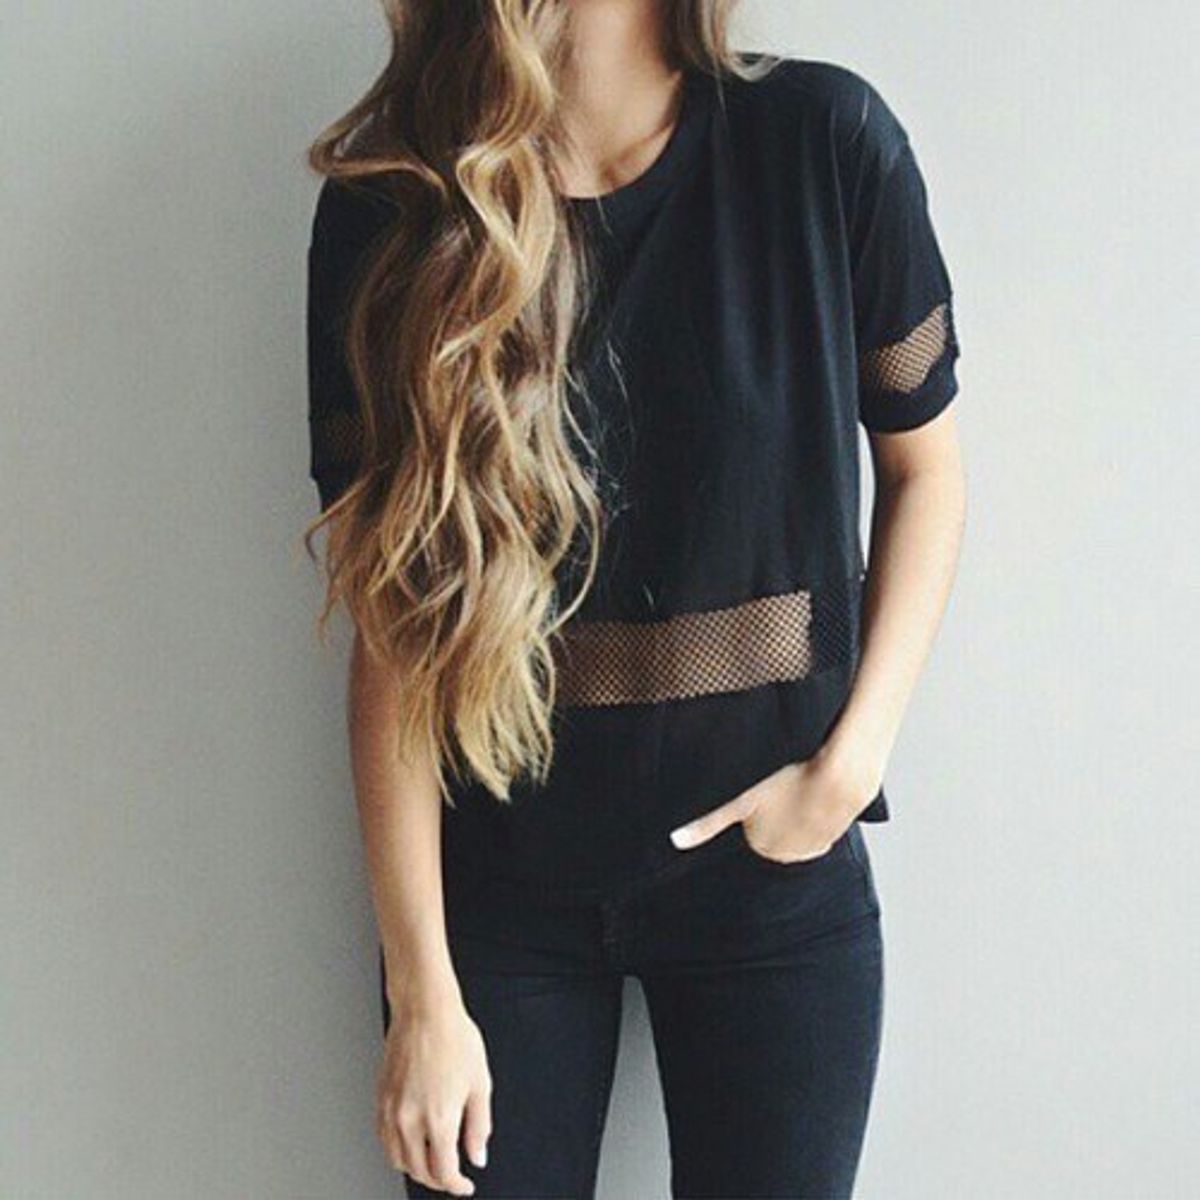 For The Girls Who Only Wear Black